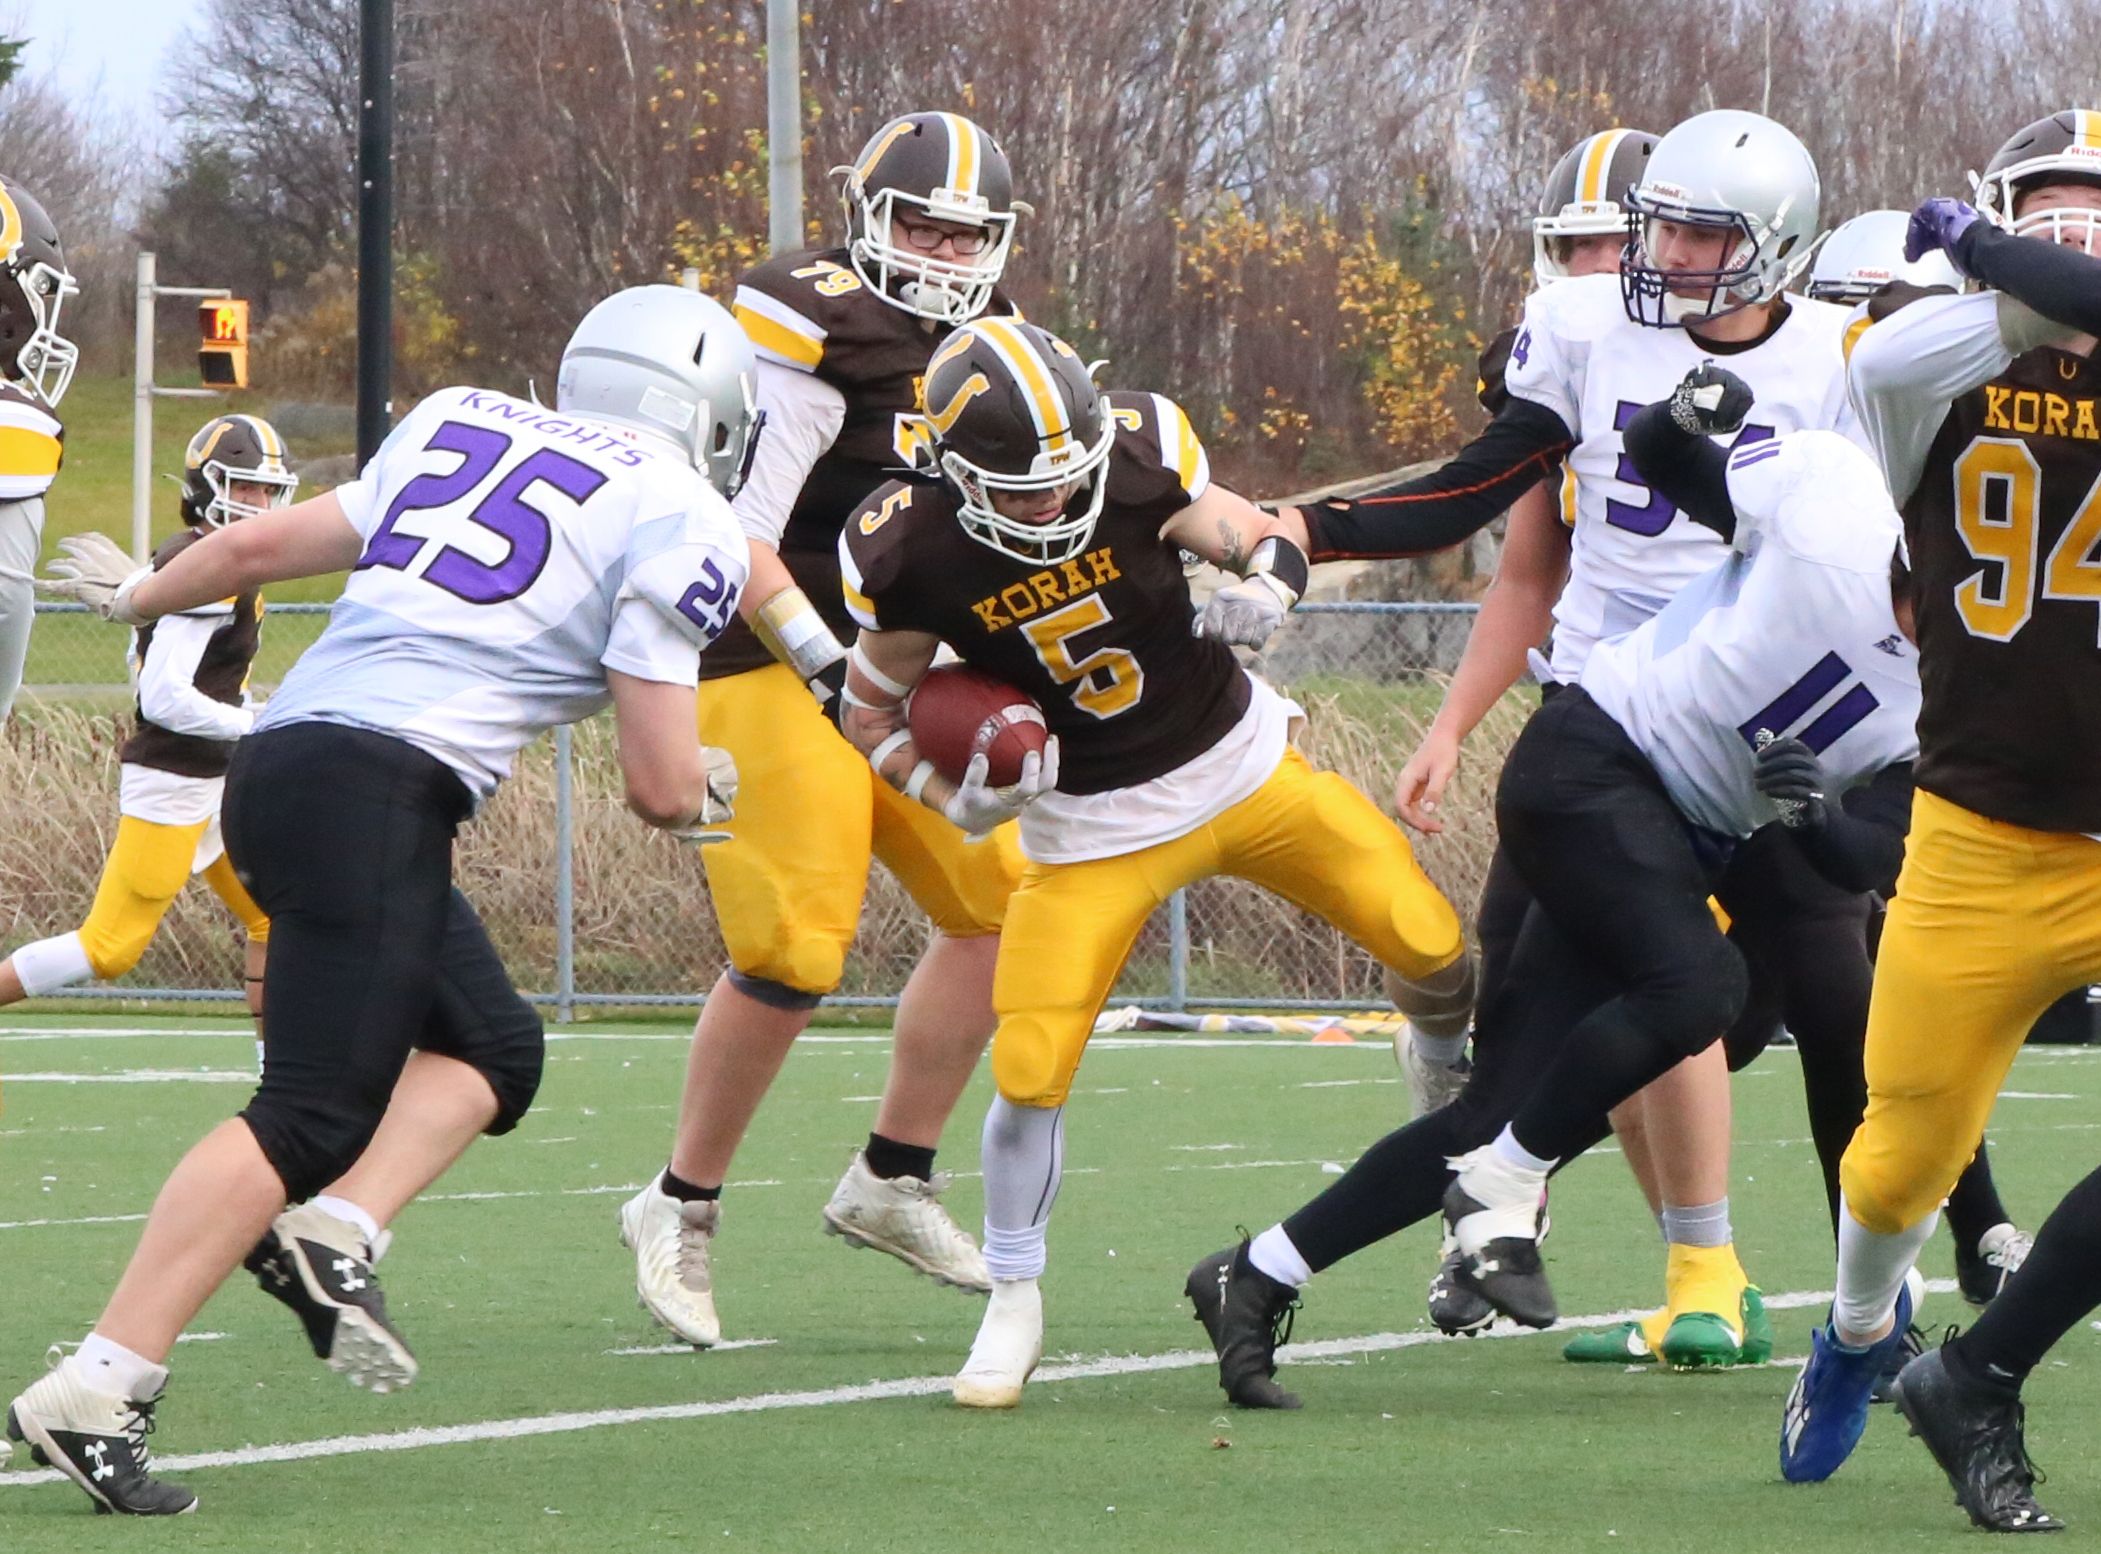 Sudbury’s Quest for NOSSA Senior Football Victory: A Curse from Sault Ste. Marie